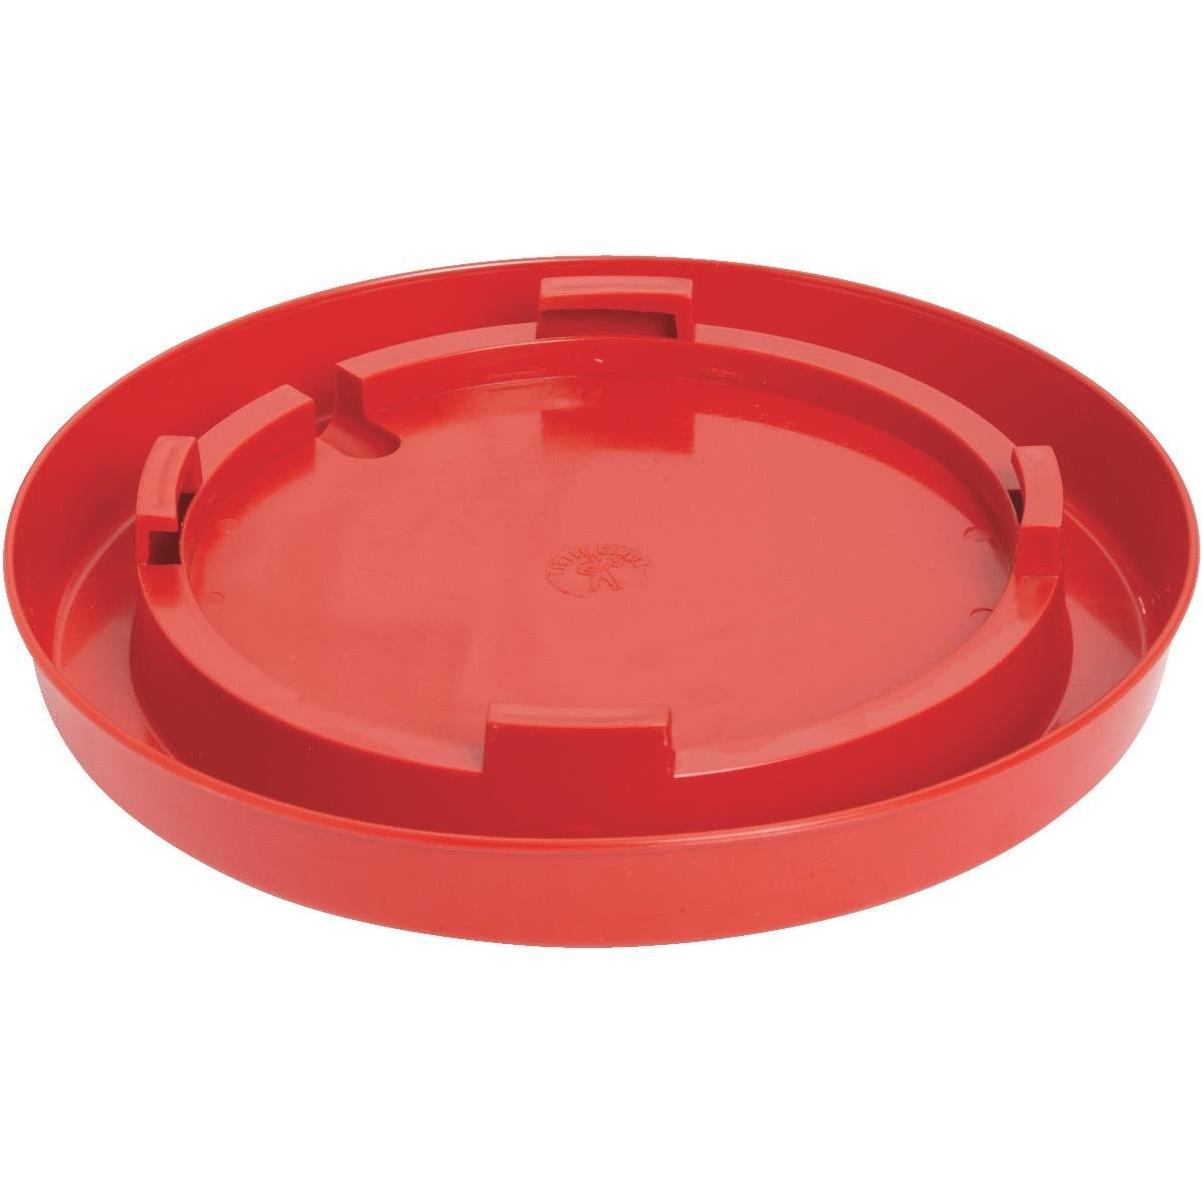 Little Giant - 1Gal Red Plastic Nesting Poultry Waterer Base